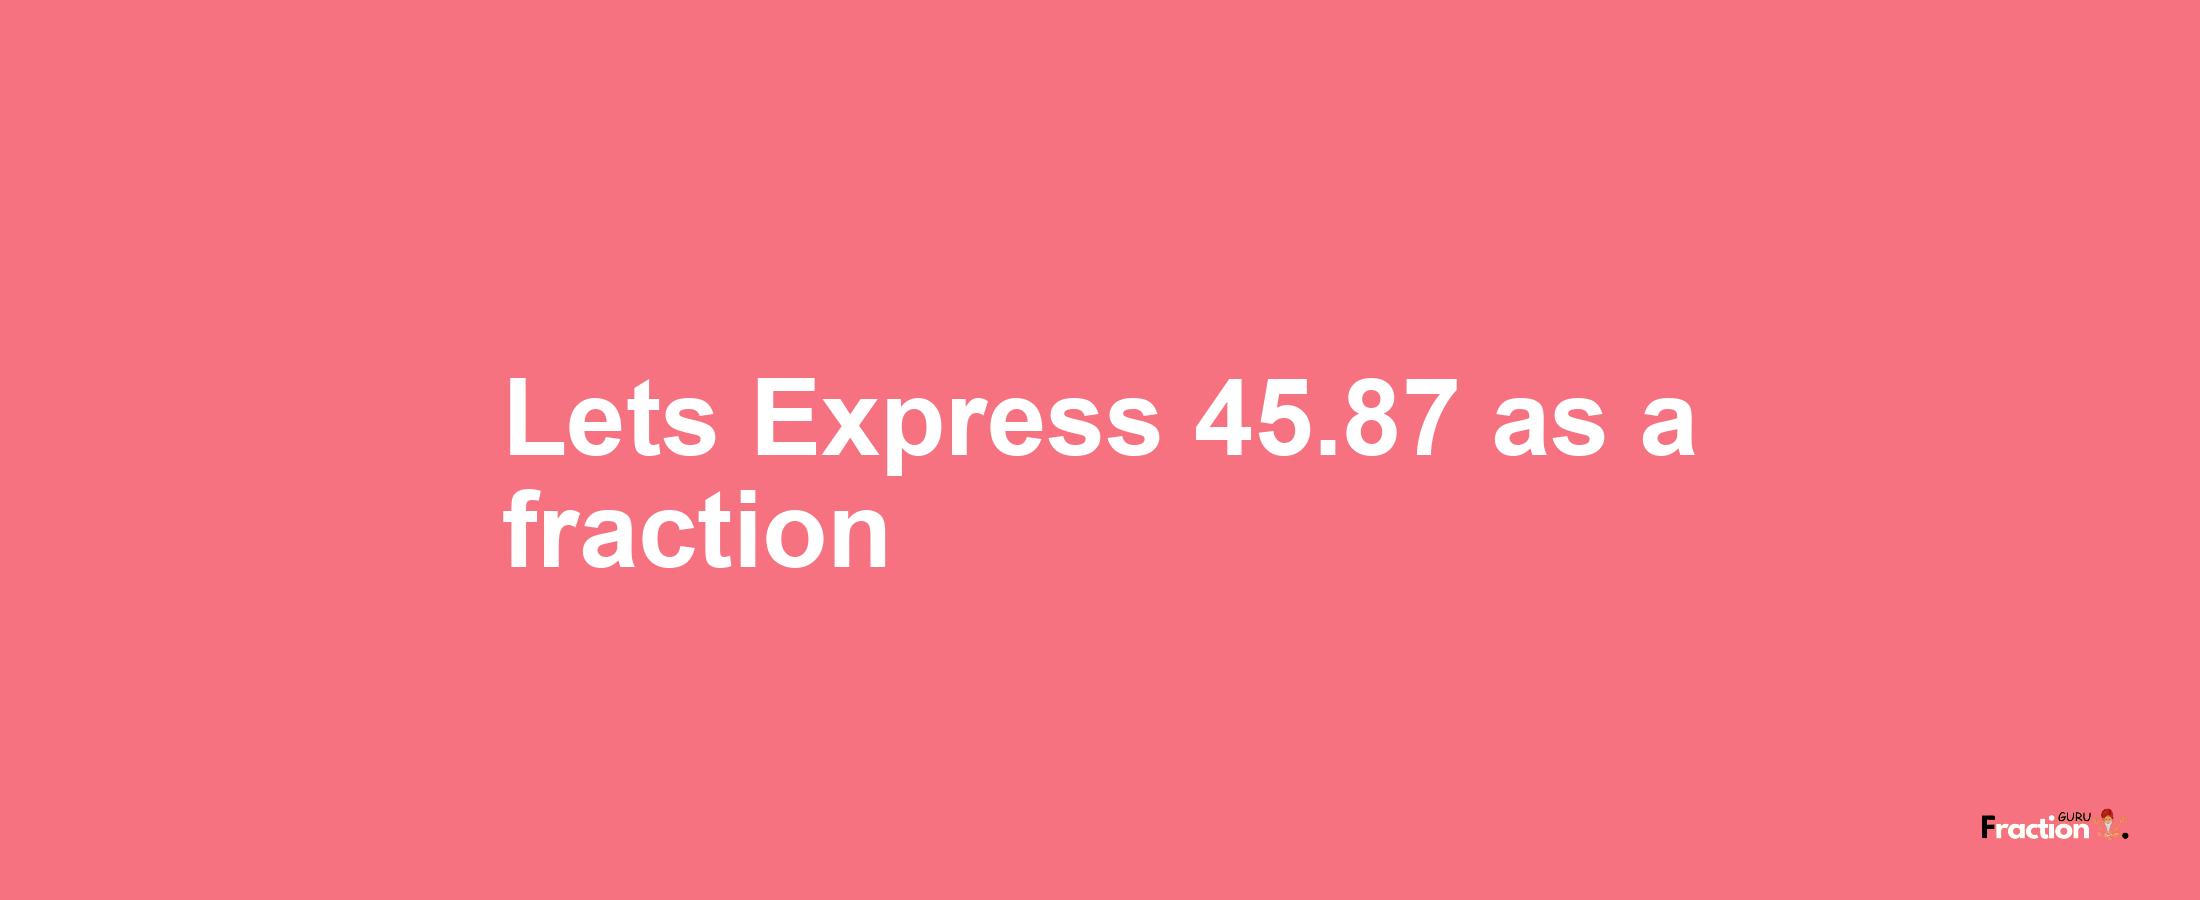 Lets Express 45.87 as afraction